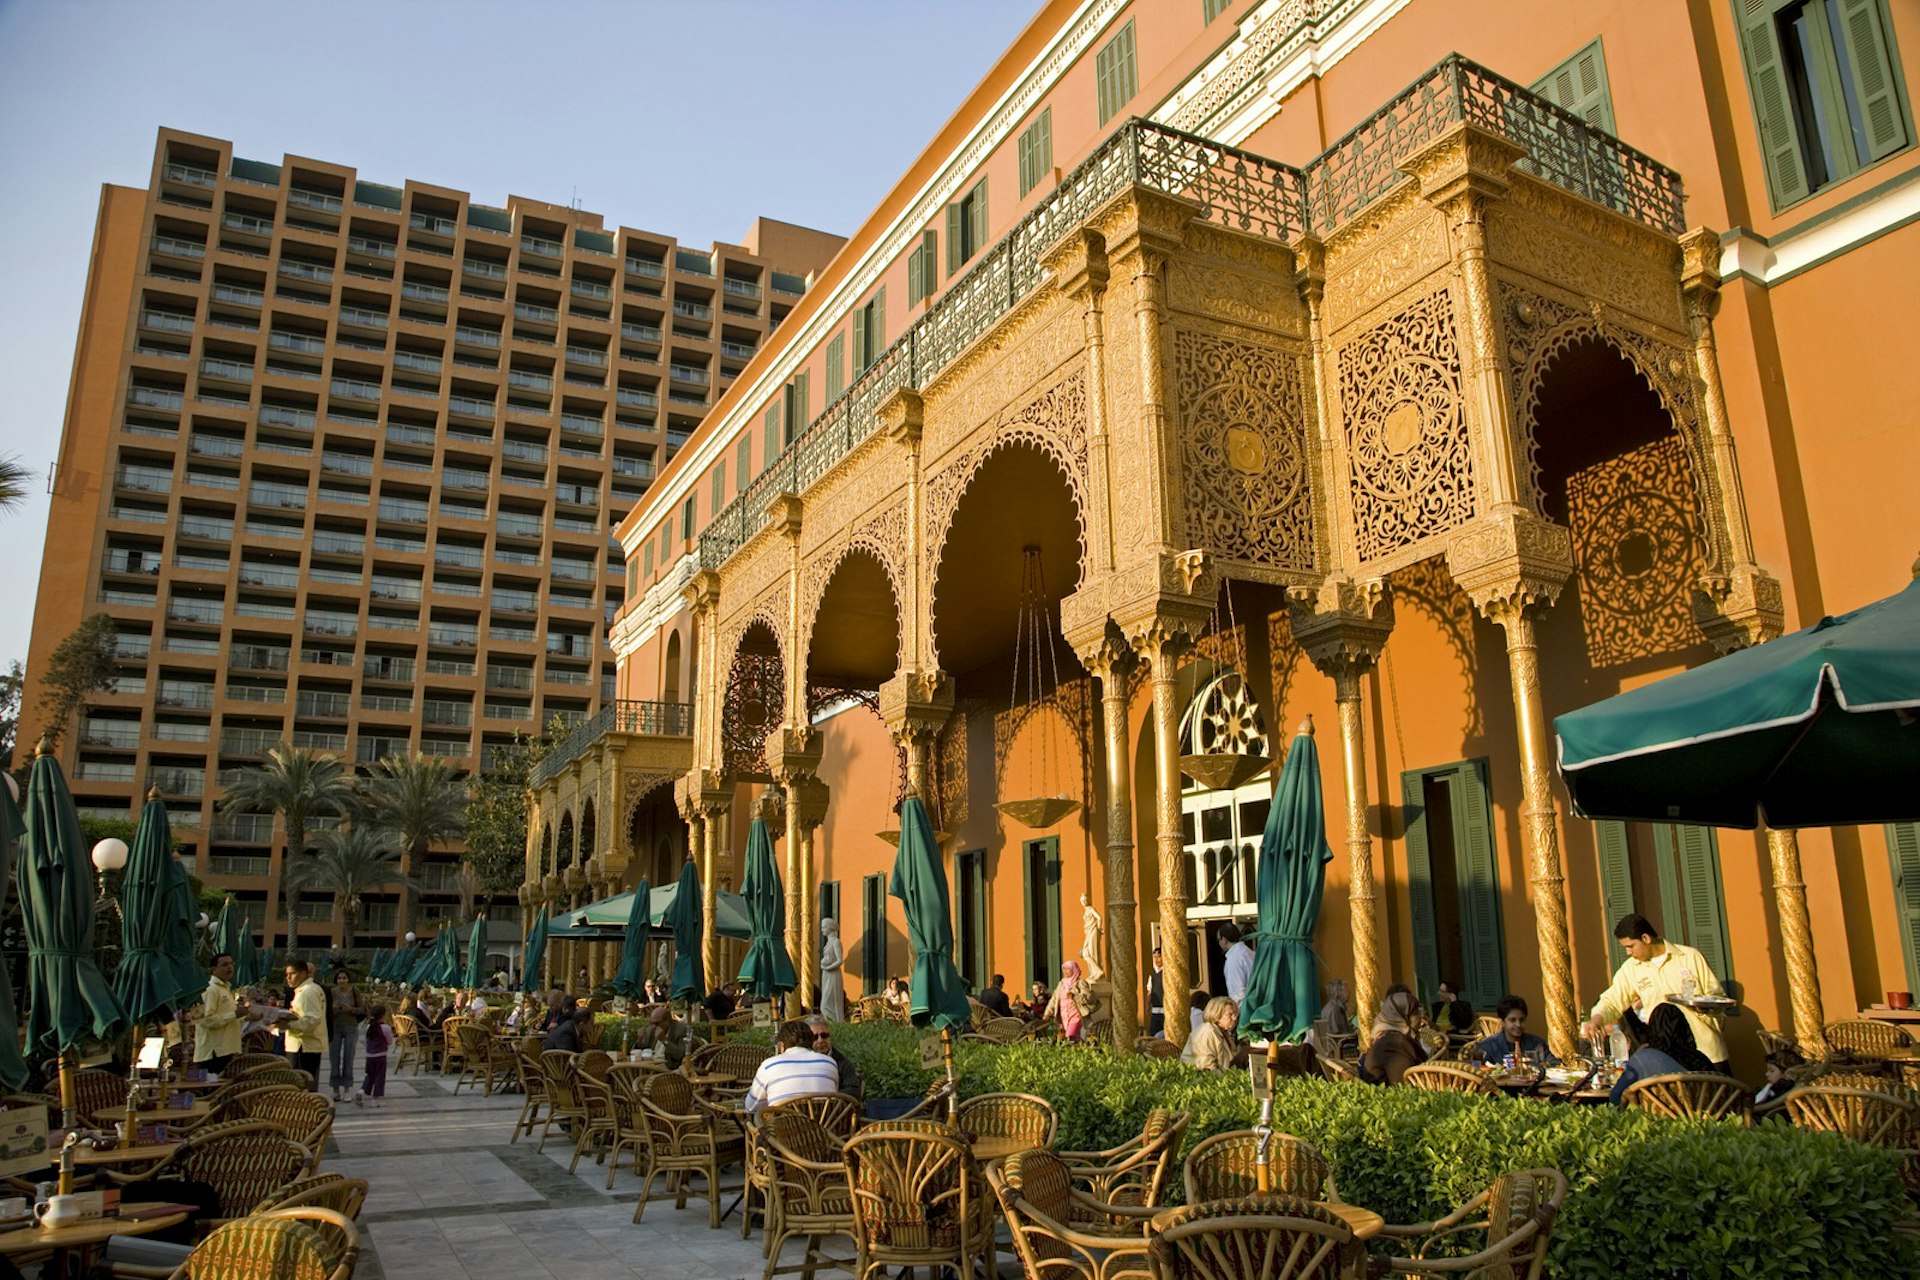 The luxurious Marriott Hotel in Cairo. Standing in the fashionable district of Zamalek, it is built around the lavish 19th century Gezira Palace, built for the opening of the Suez Canal. Image by Julian Love / Getty Images